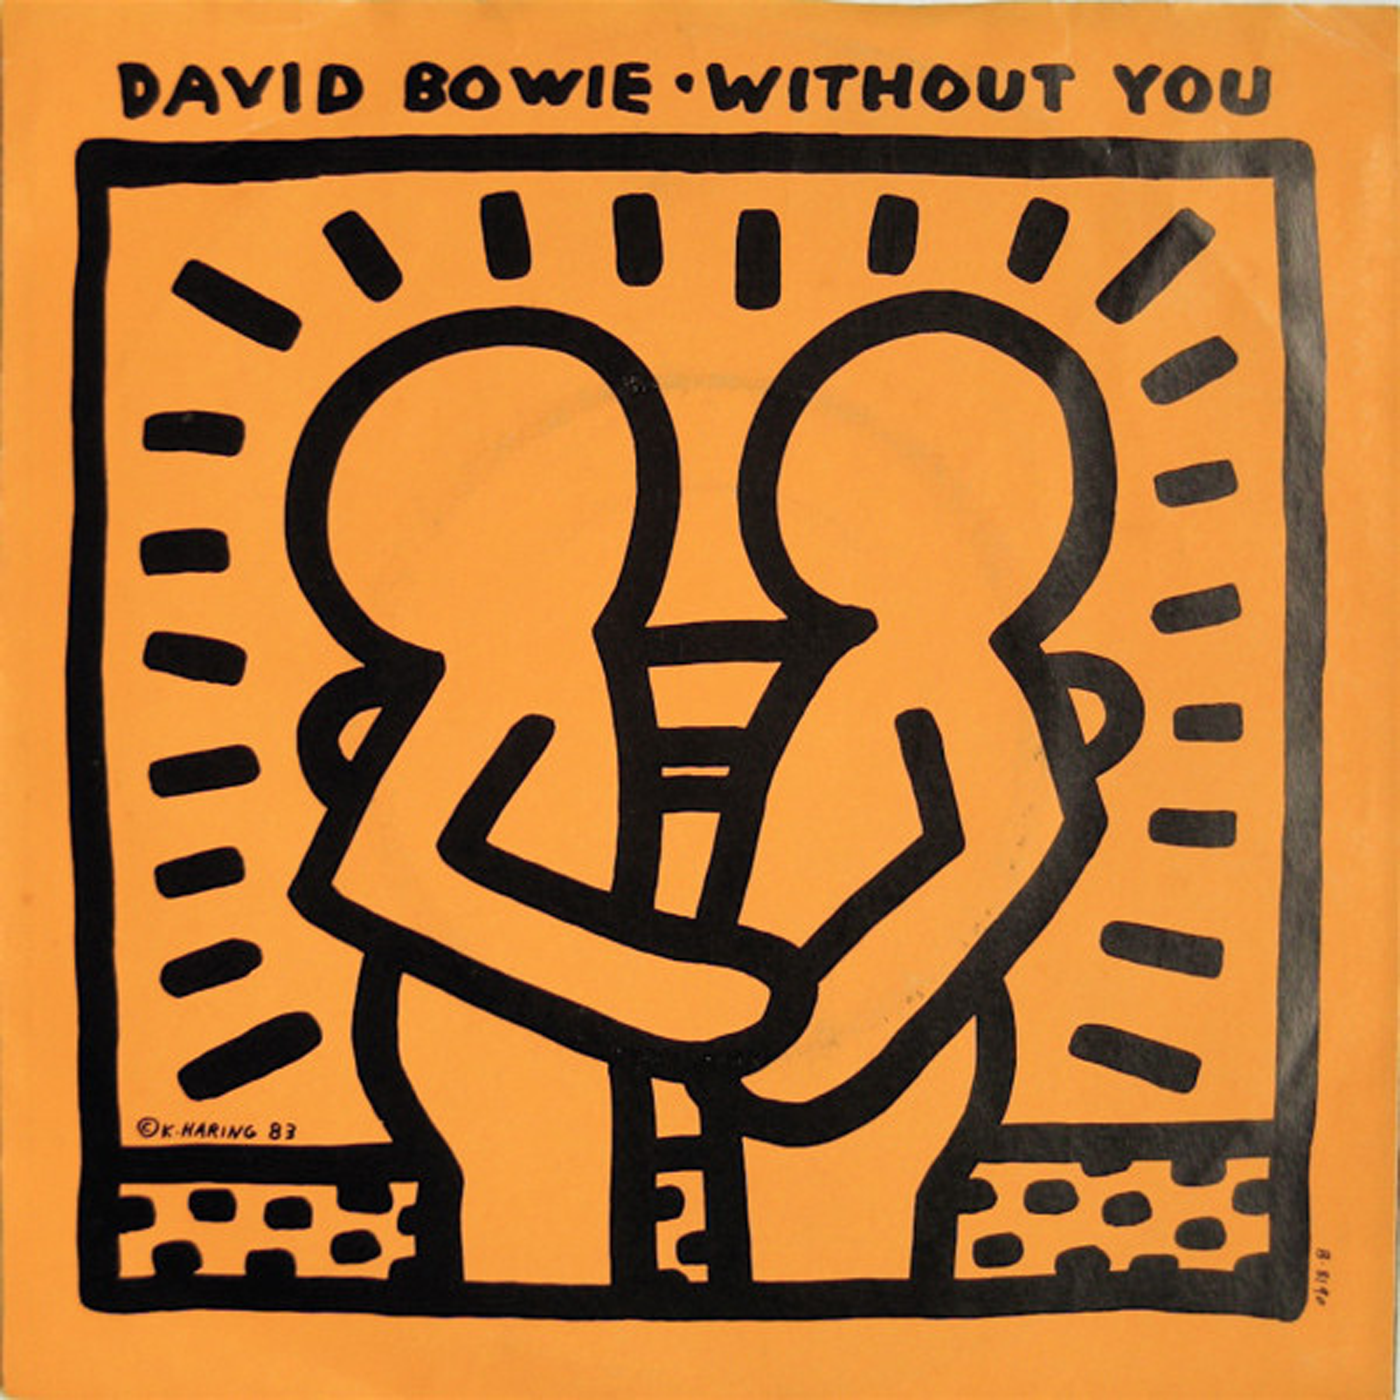 DAVID-BOWIE-Withoutyou.png